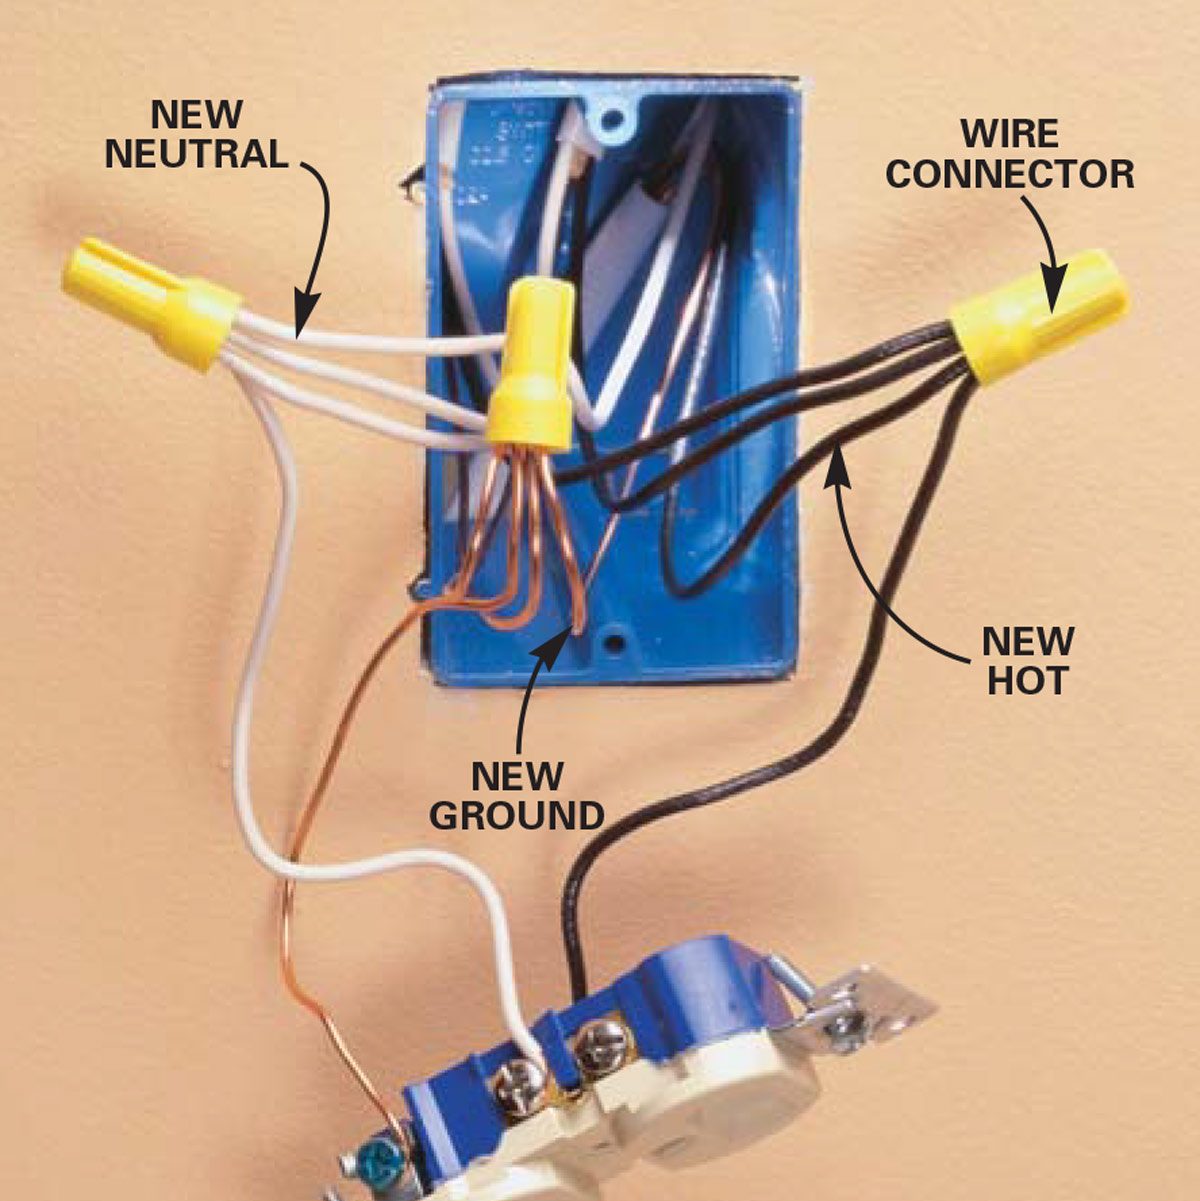 Installing outlet in electrical box with two sets of wires? - Home